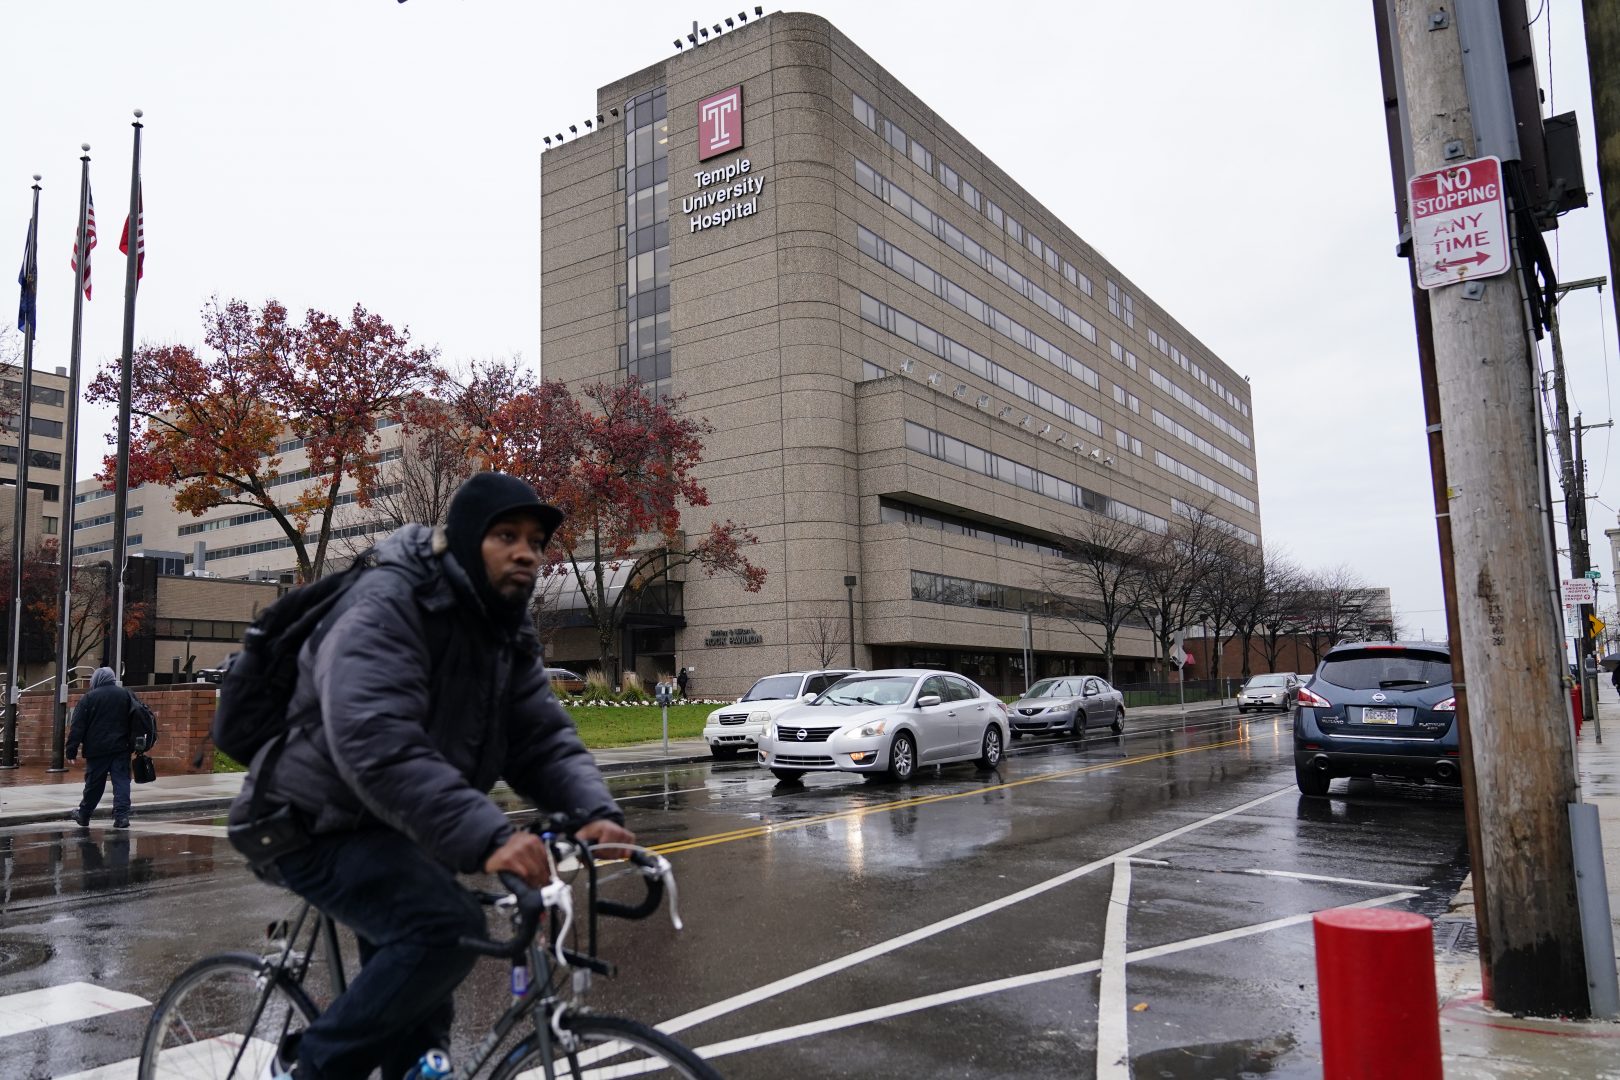 A man rides a bicycle past Temple University Hospital, Friday, Dec. 4, 2020, in Philadelphia.